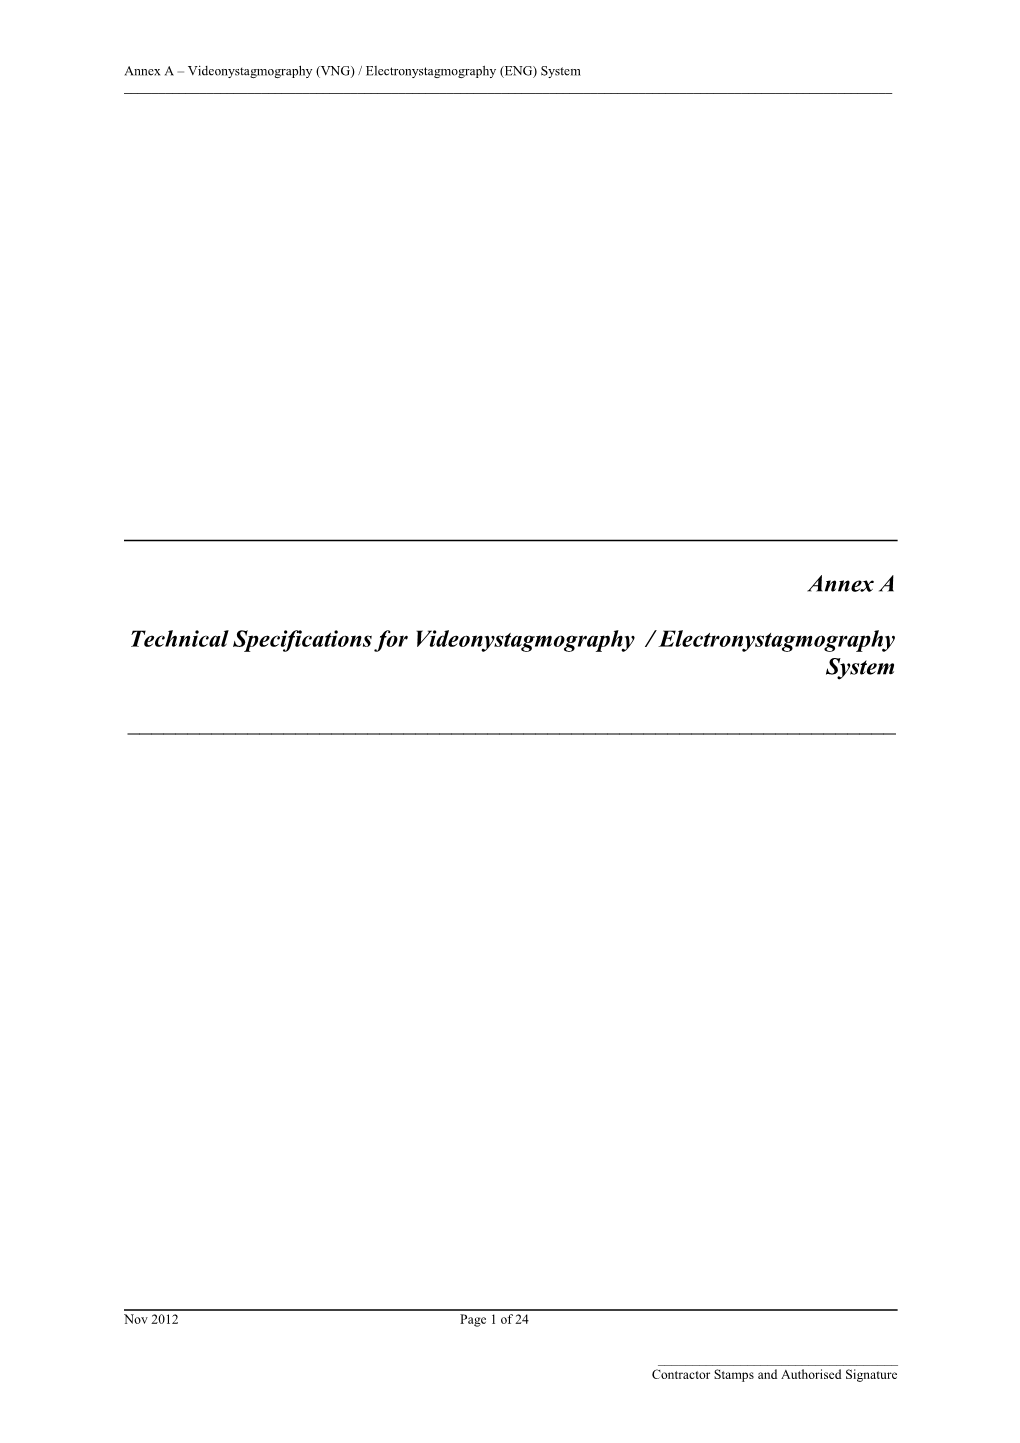 Technical Specifications for Videonystagmography / Electronystagmography System